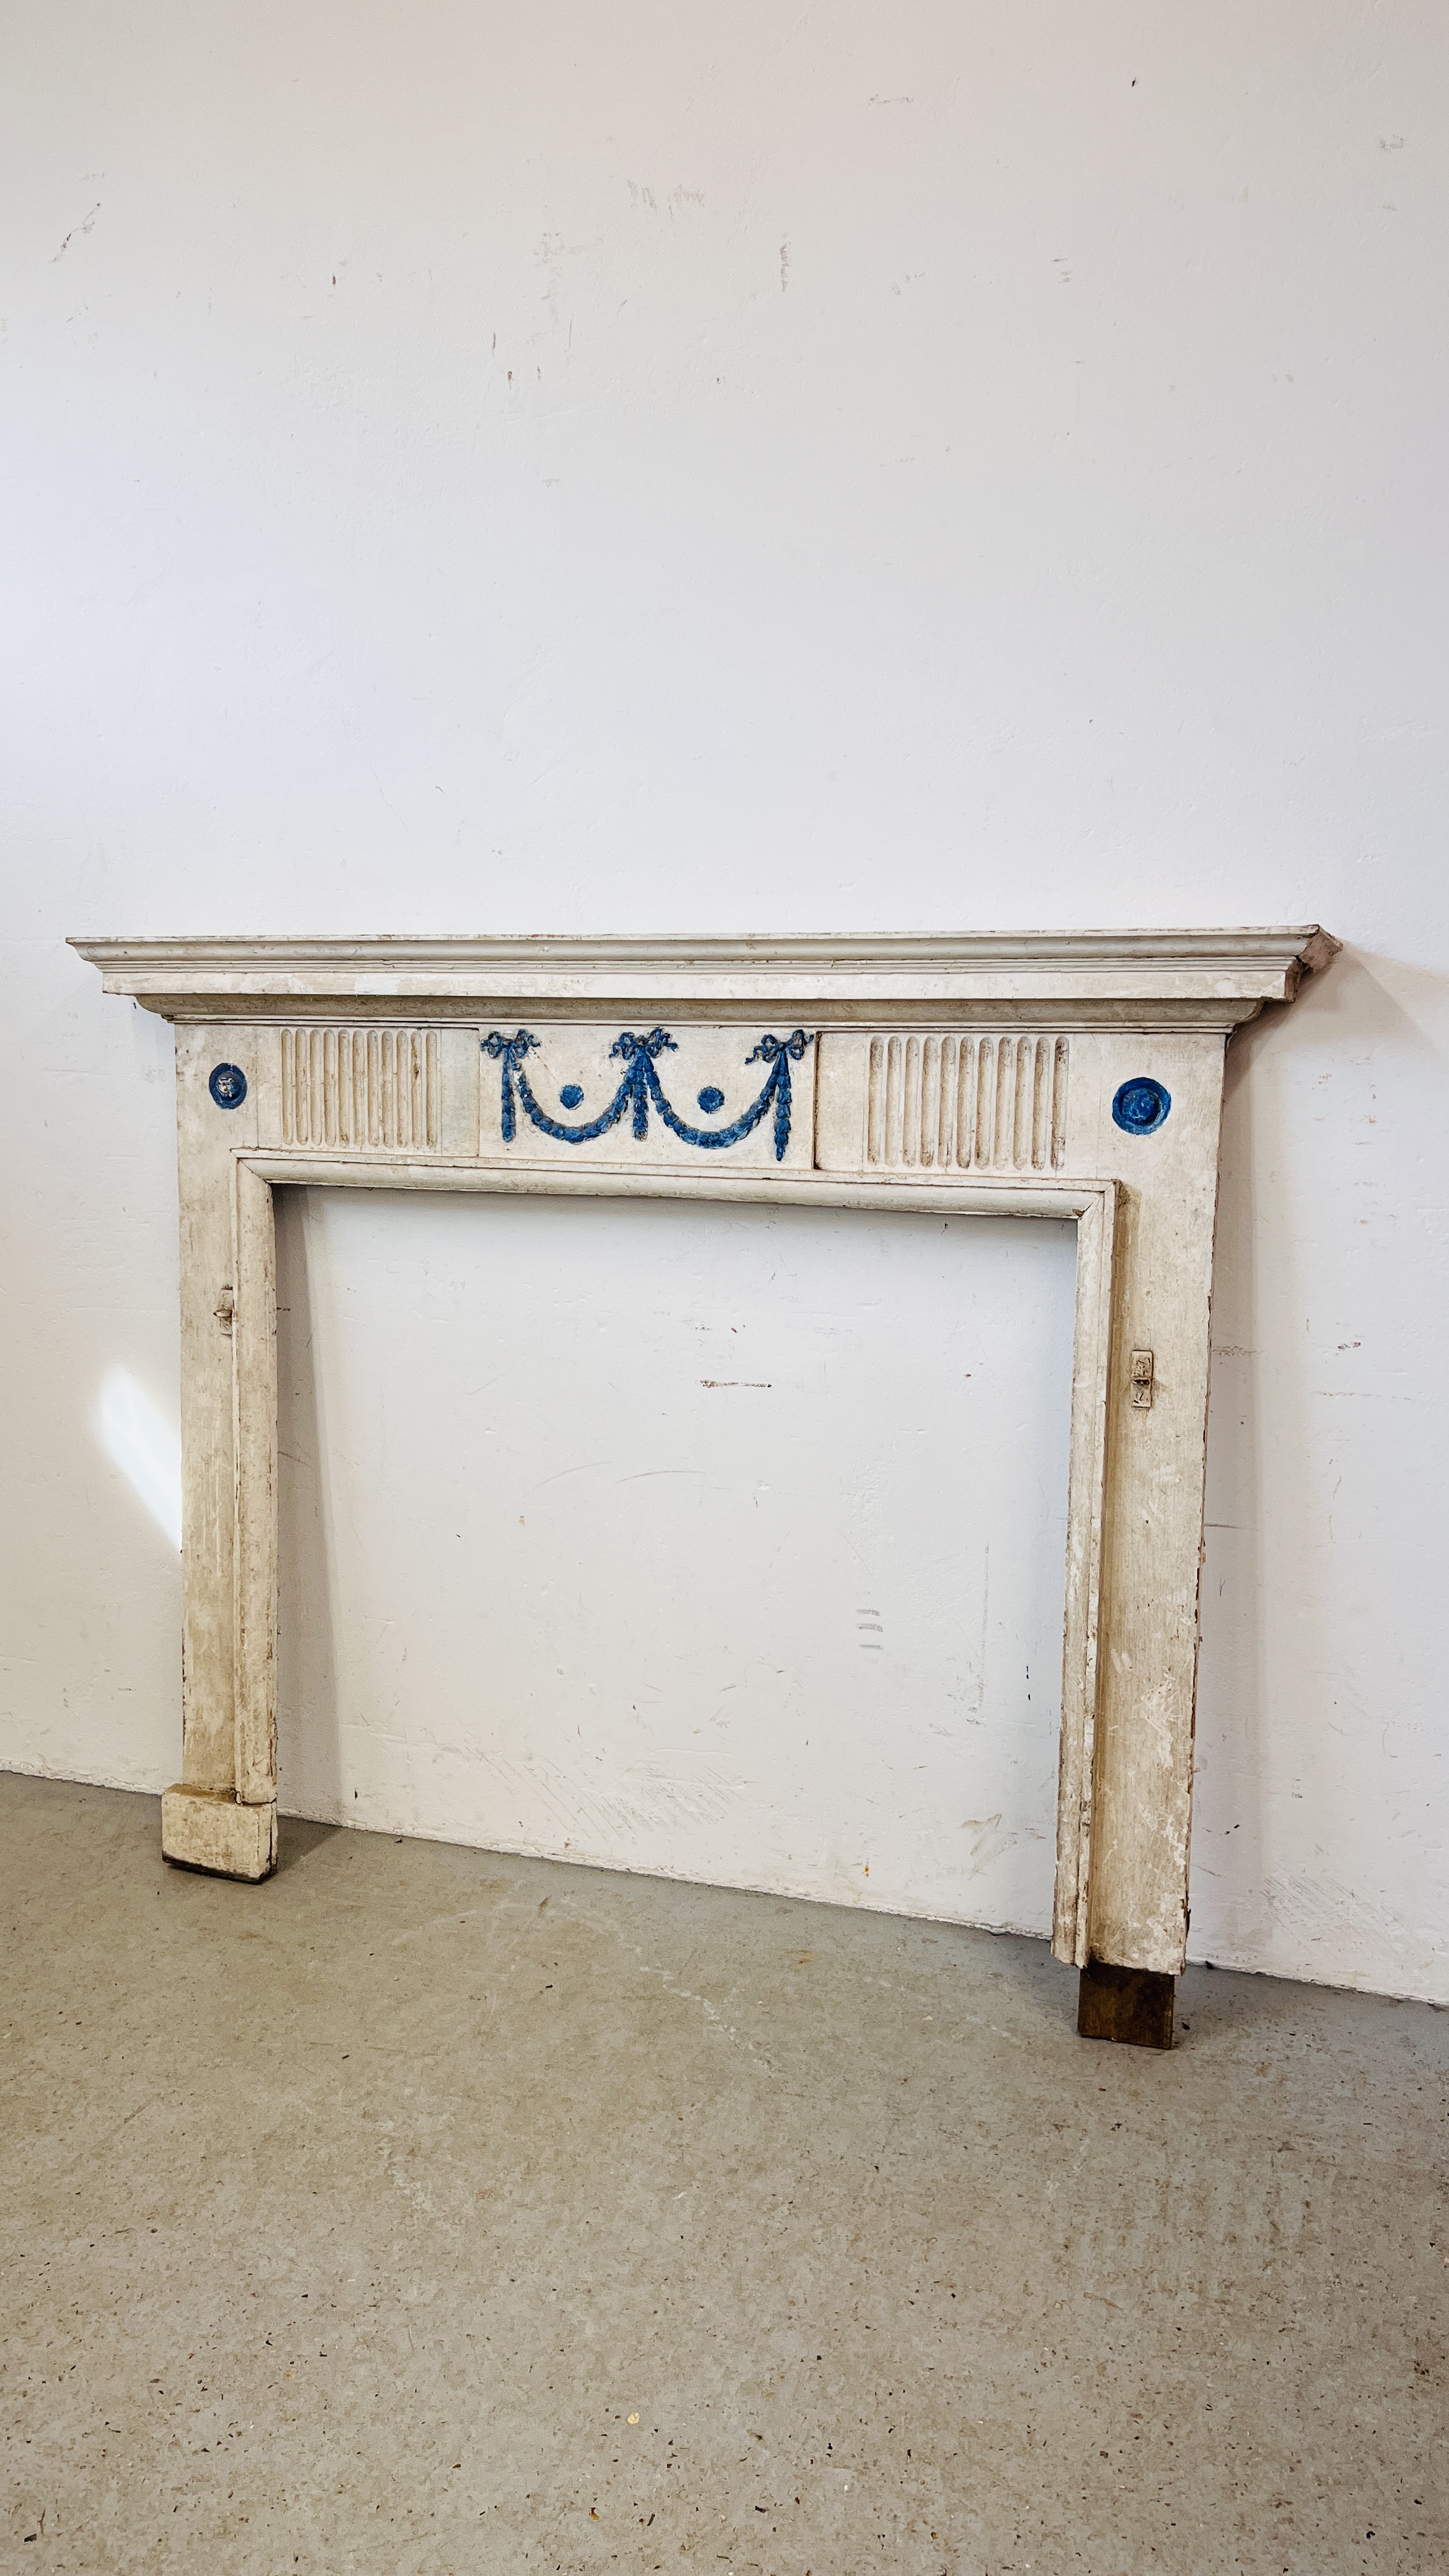 A WHITE PAINTED ANTIQUE FIRE SURROUND - OPENING WIDTH 105M. HEIGHT 93CM.